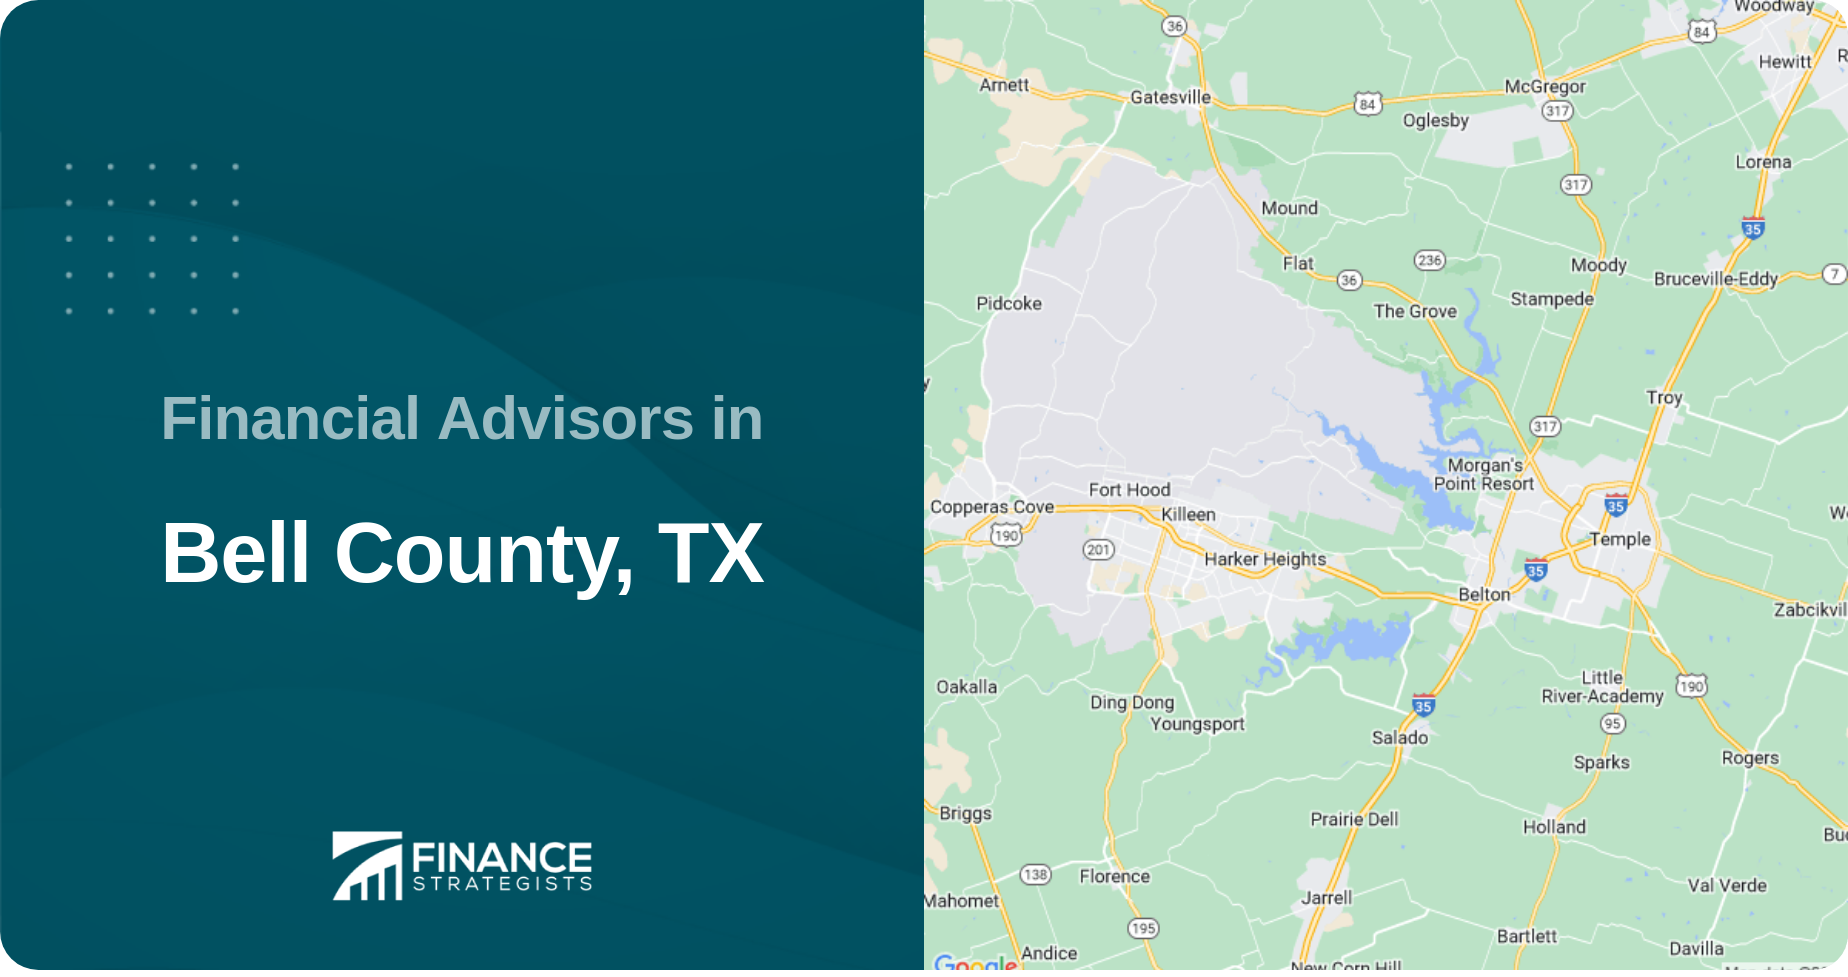 Financial Advisors in Bell County, TX